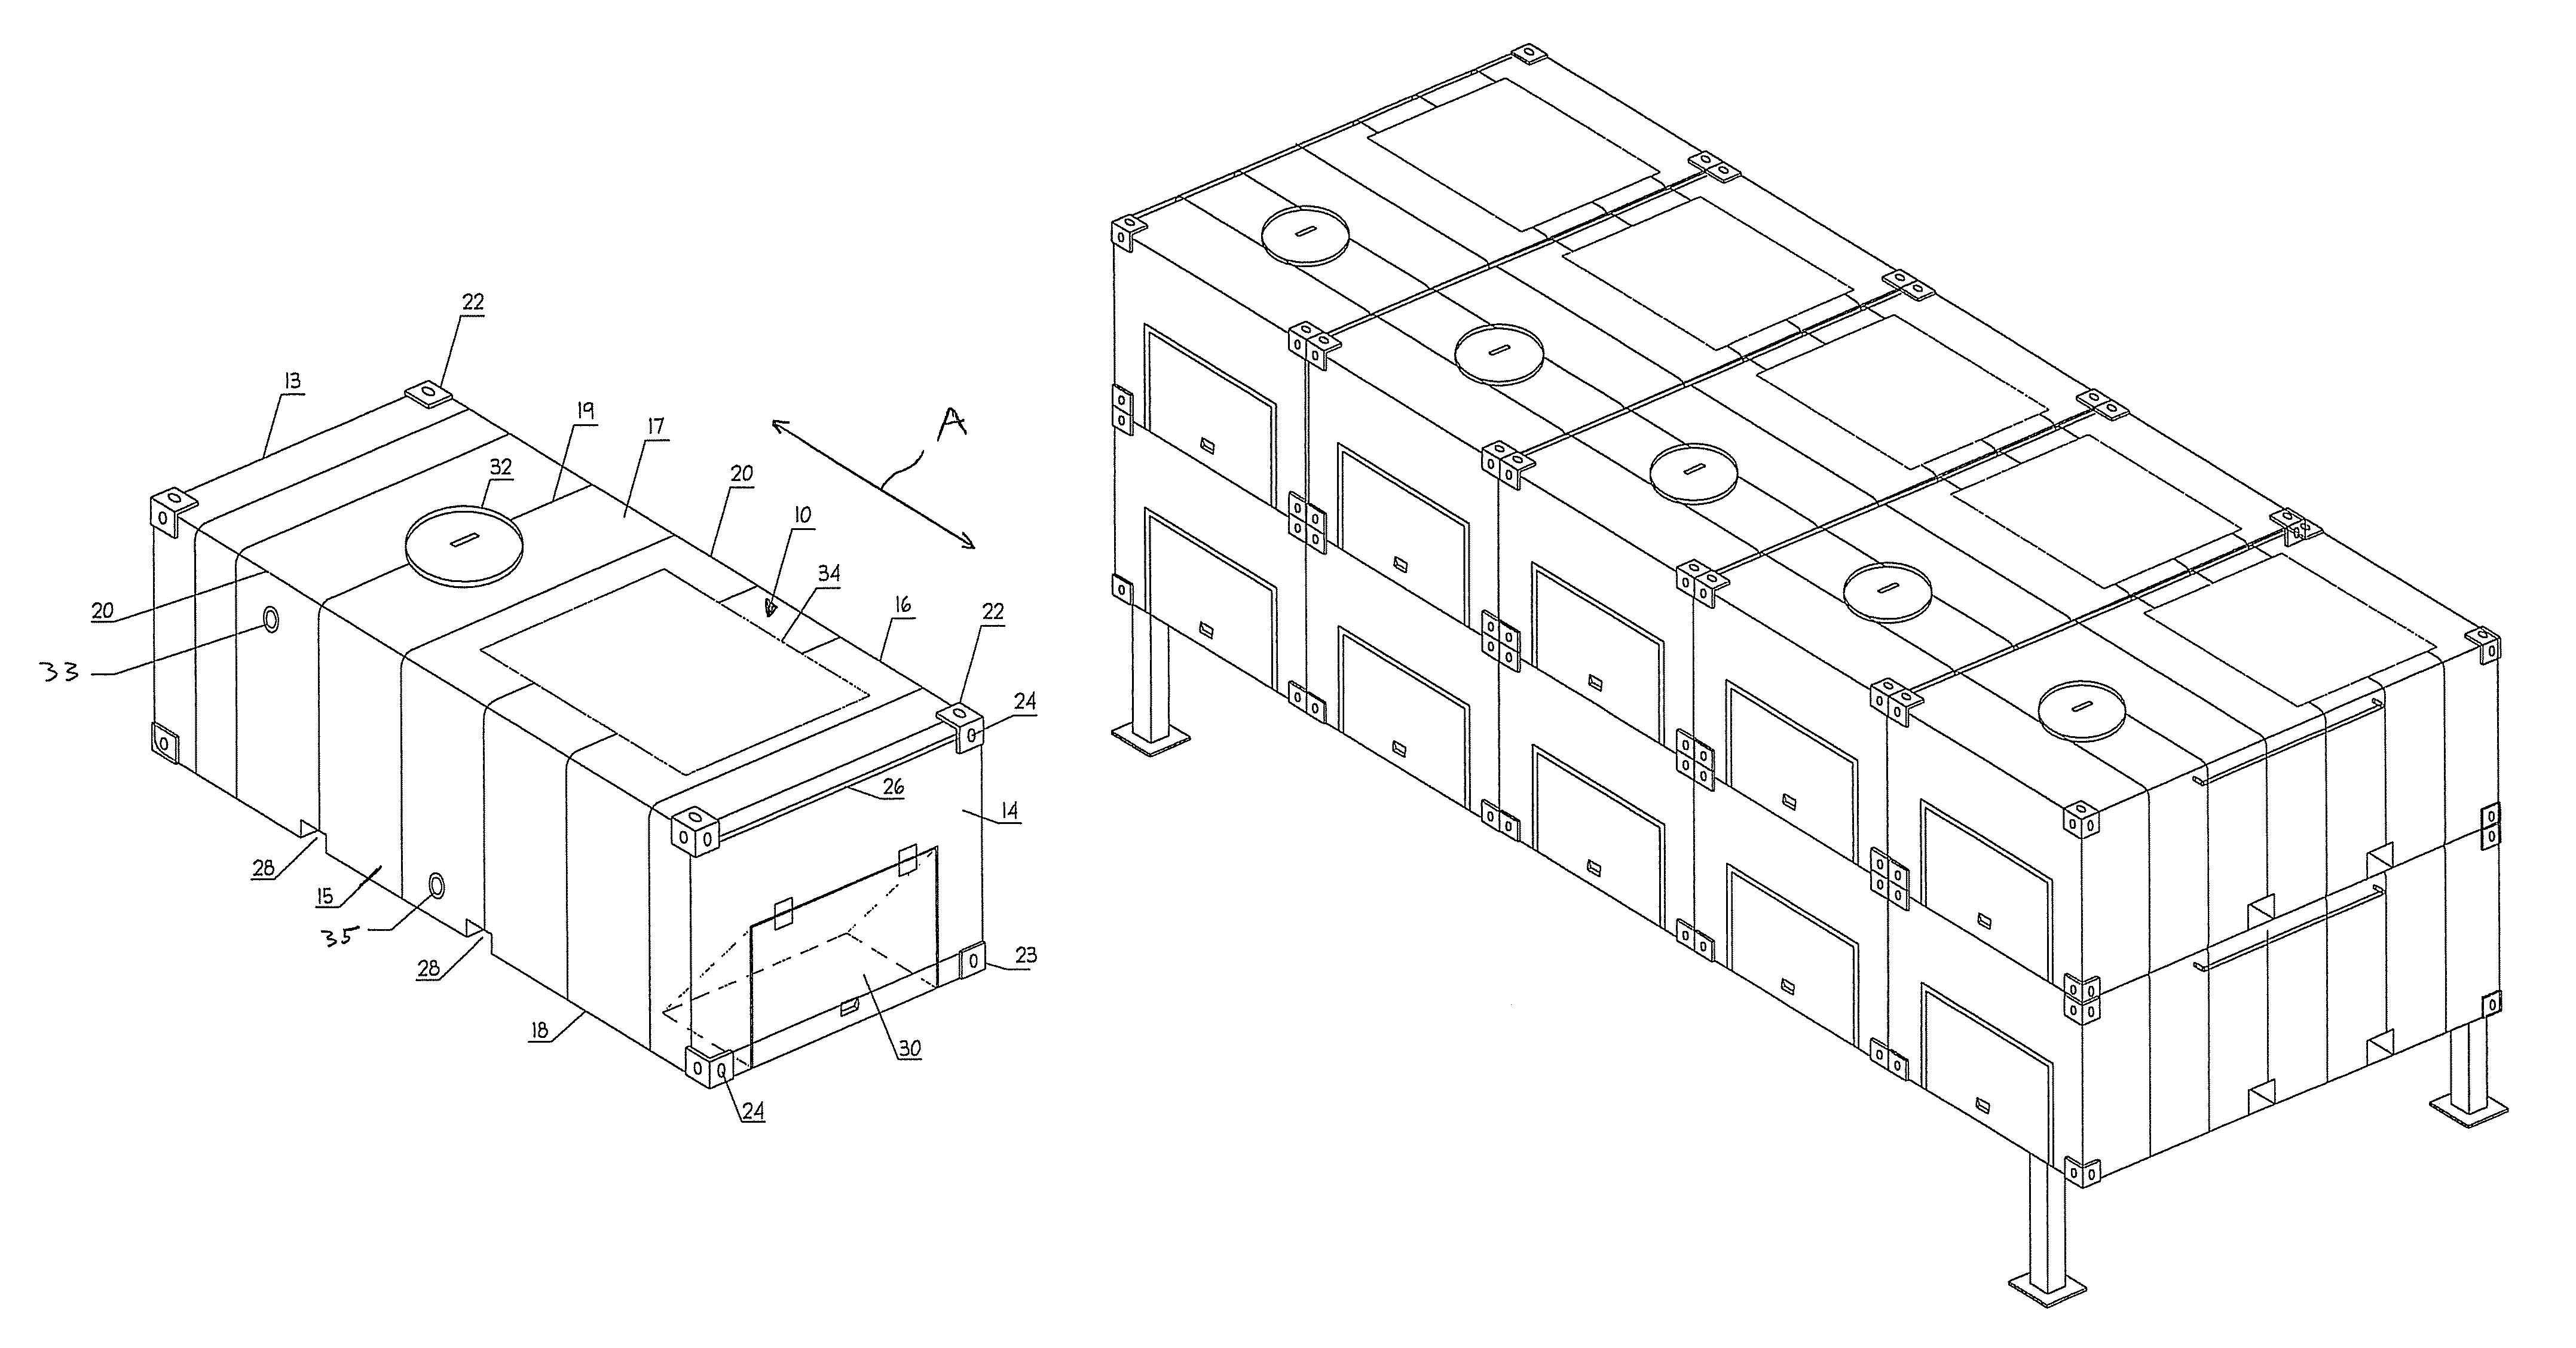 Shipping containers for flowable materials